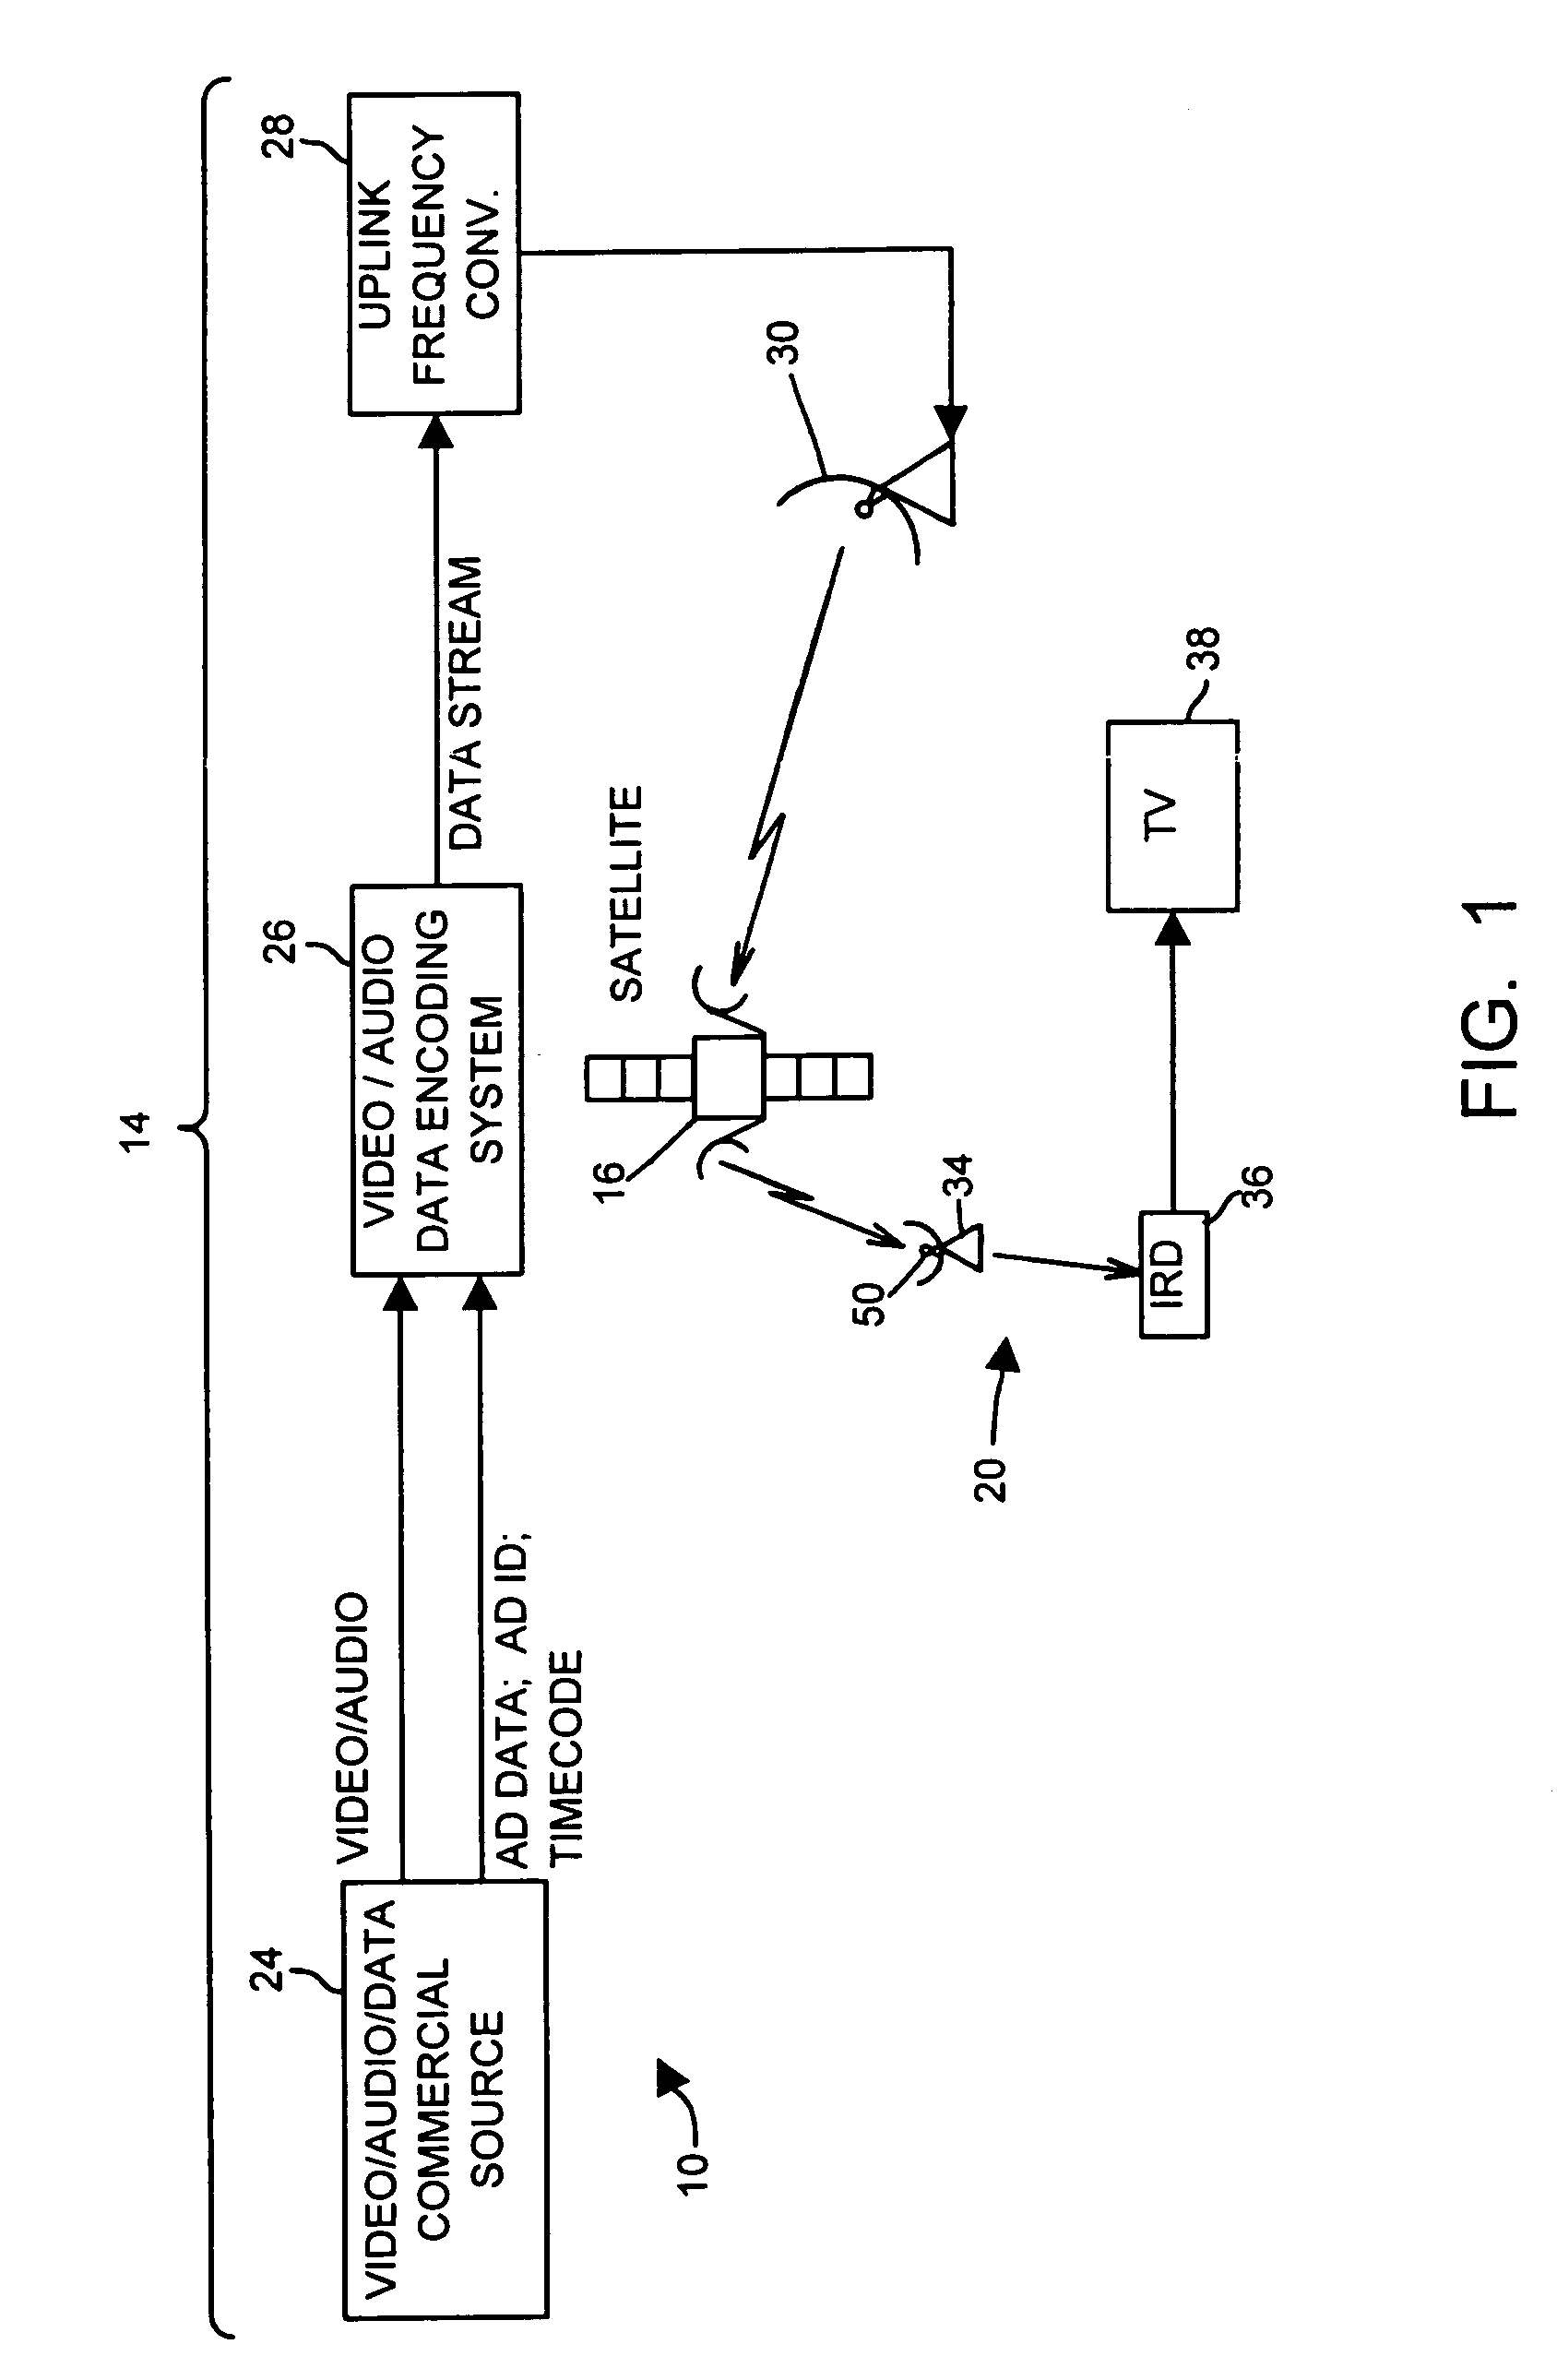 Method and apparatus for storing and displaying digital objects associated with an electronic television program guide using fuzzy logic